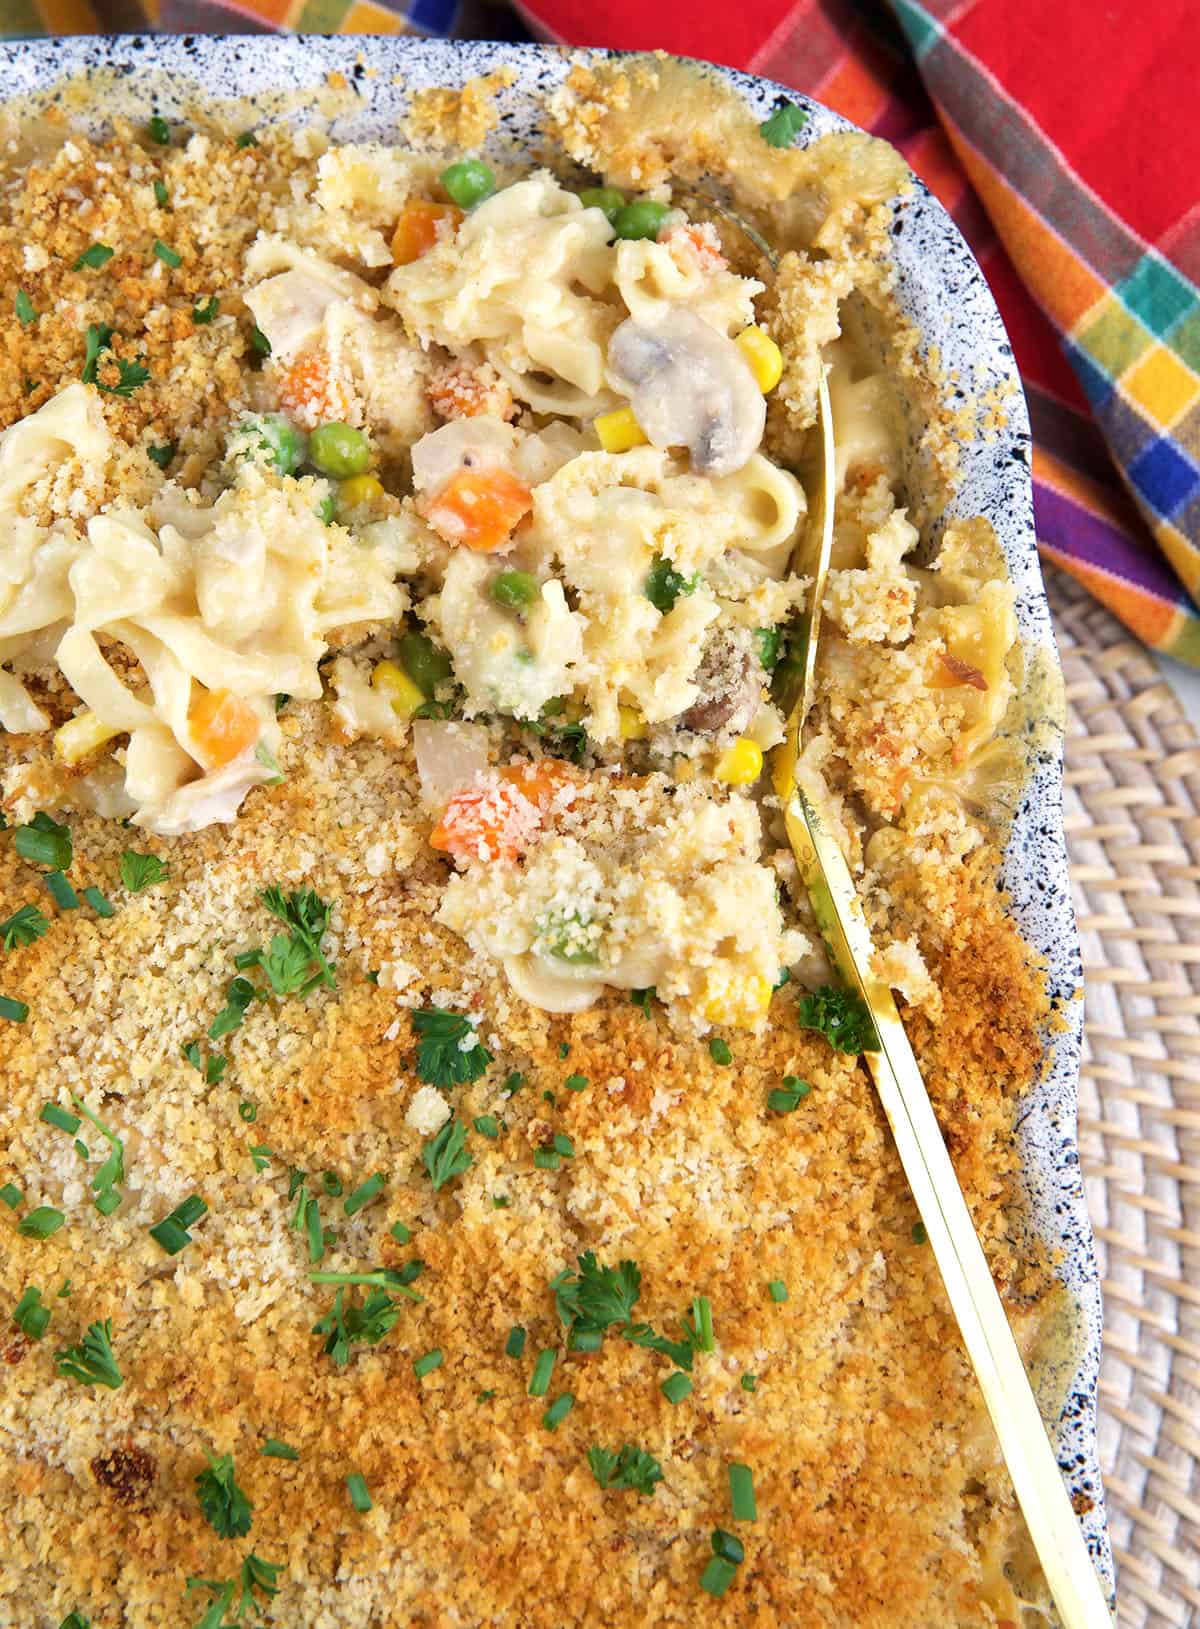 A serving spoon is lifting up a small portion of chicken noodle casserole from the dish.